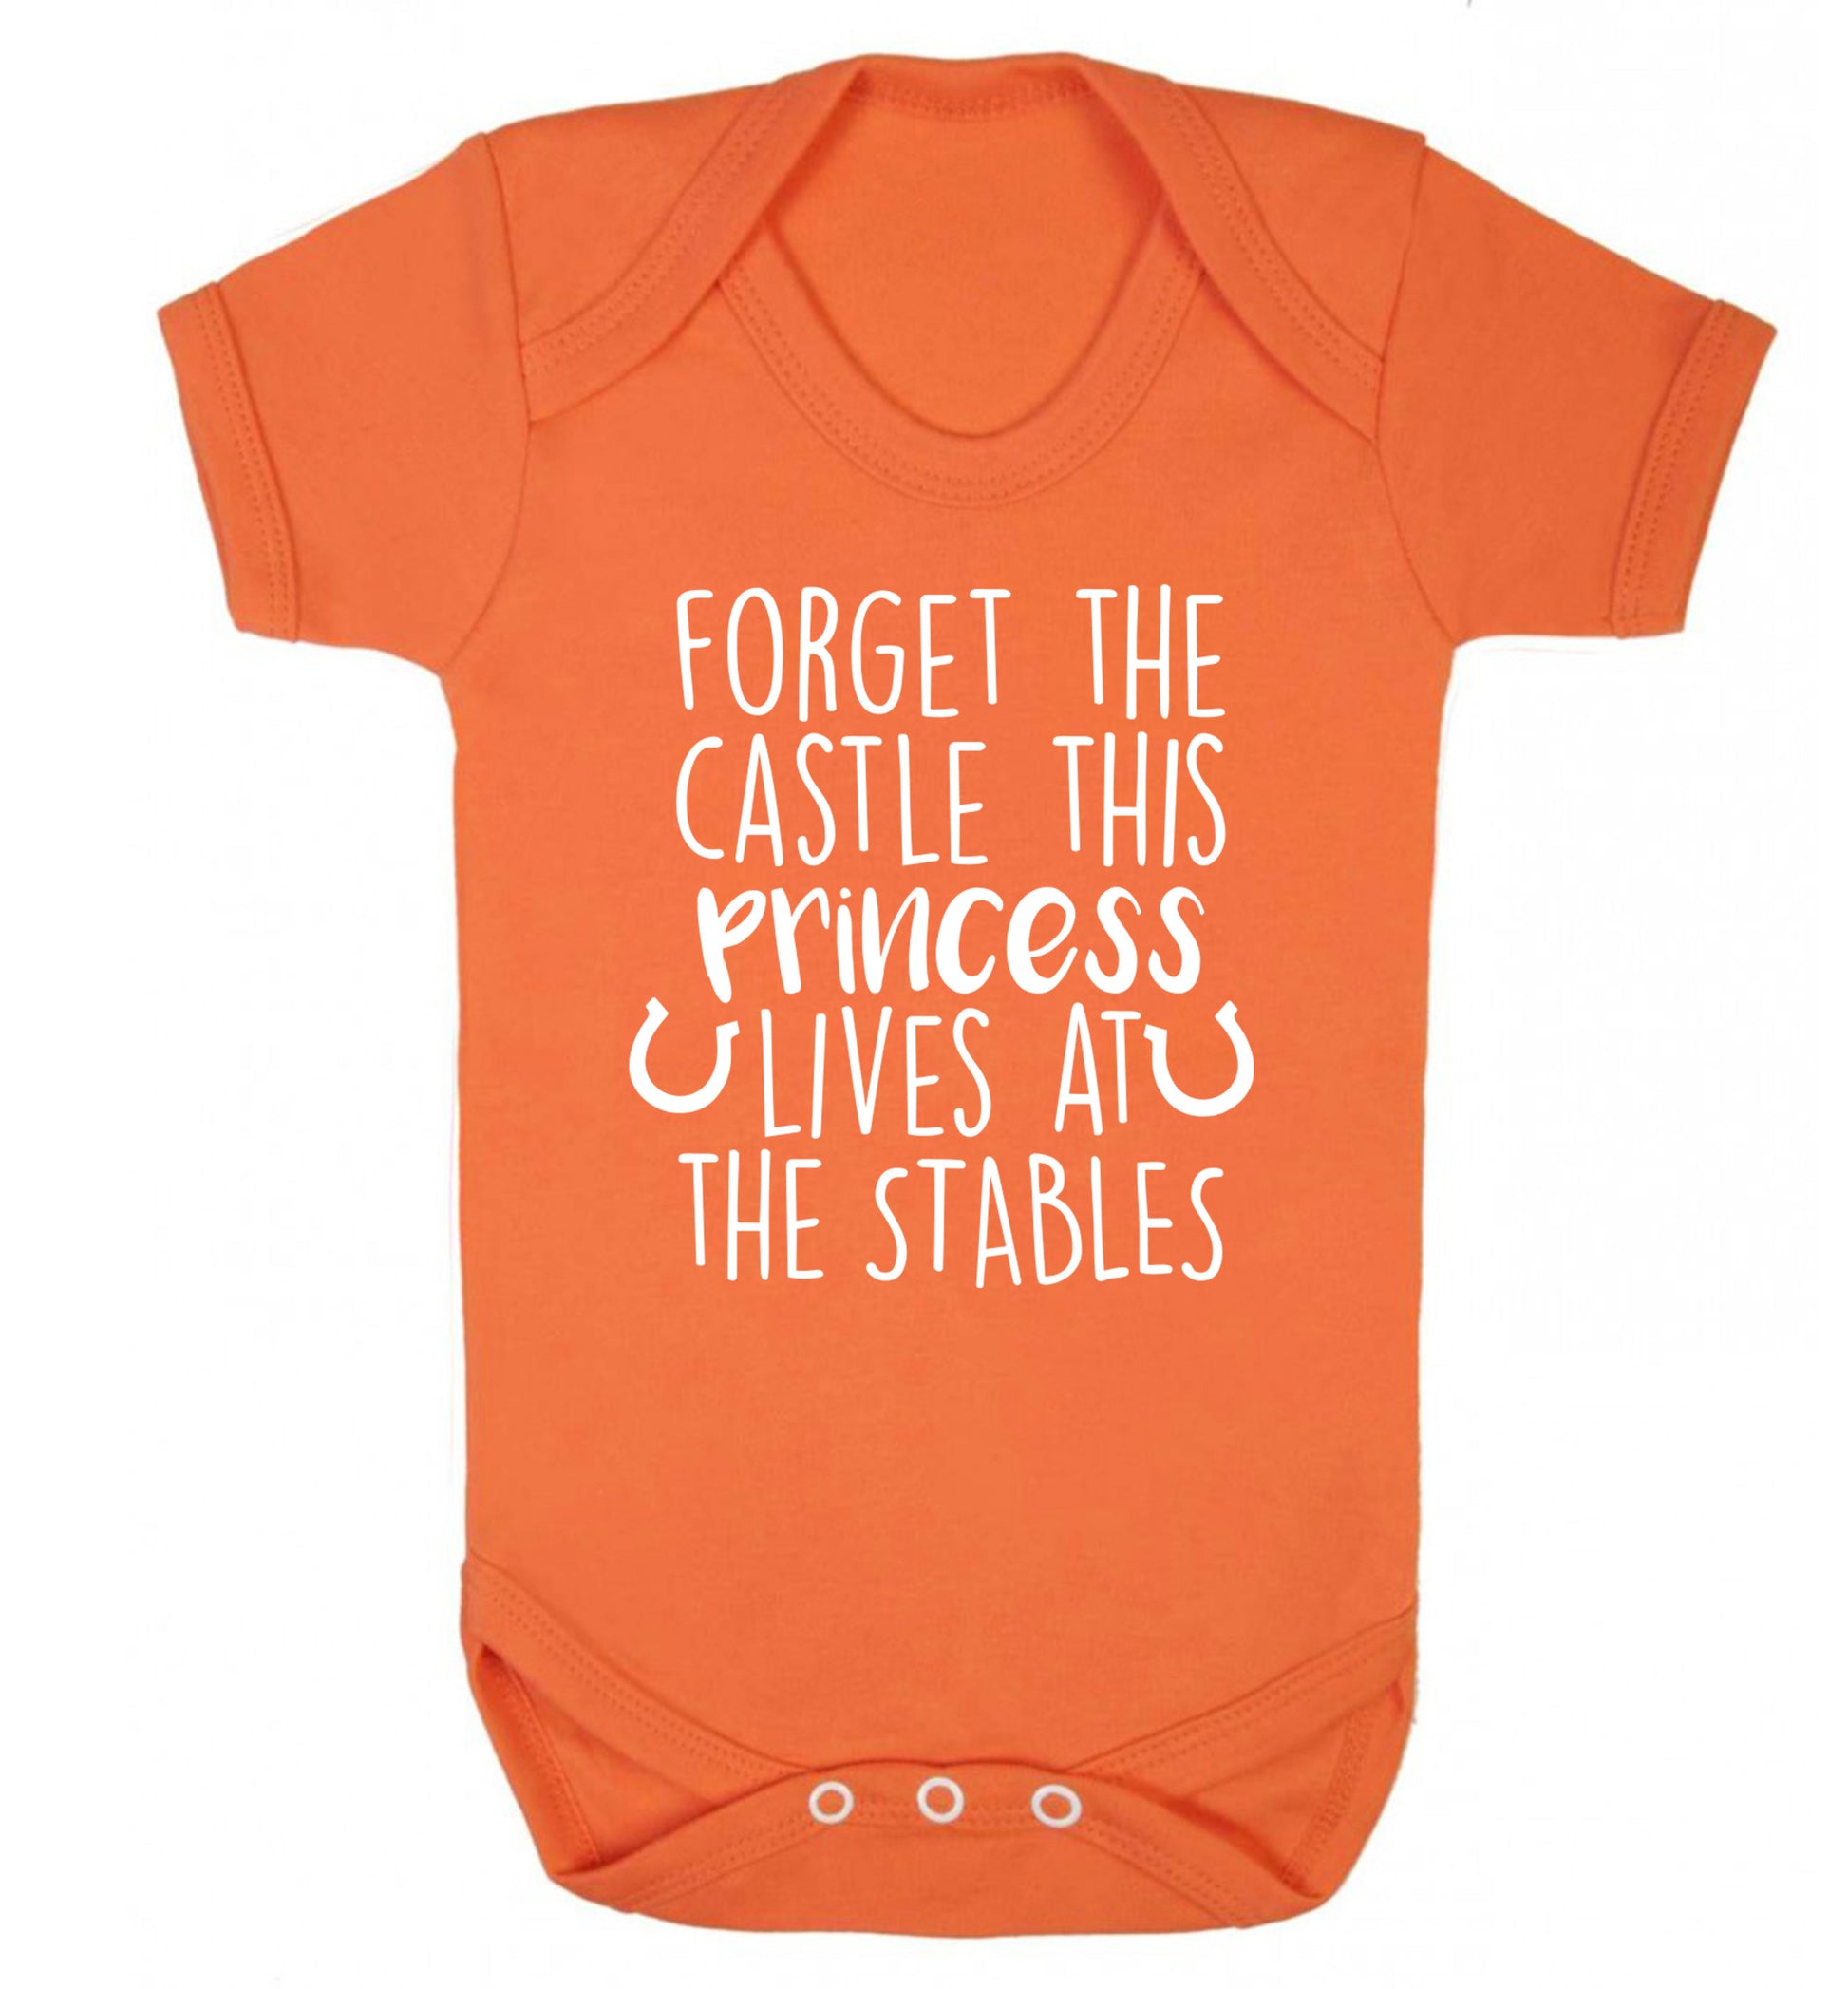 Forget the castle this princess lives at the stables Baby Vest orange 18-24 months